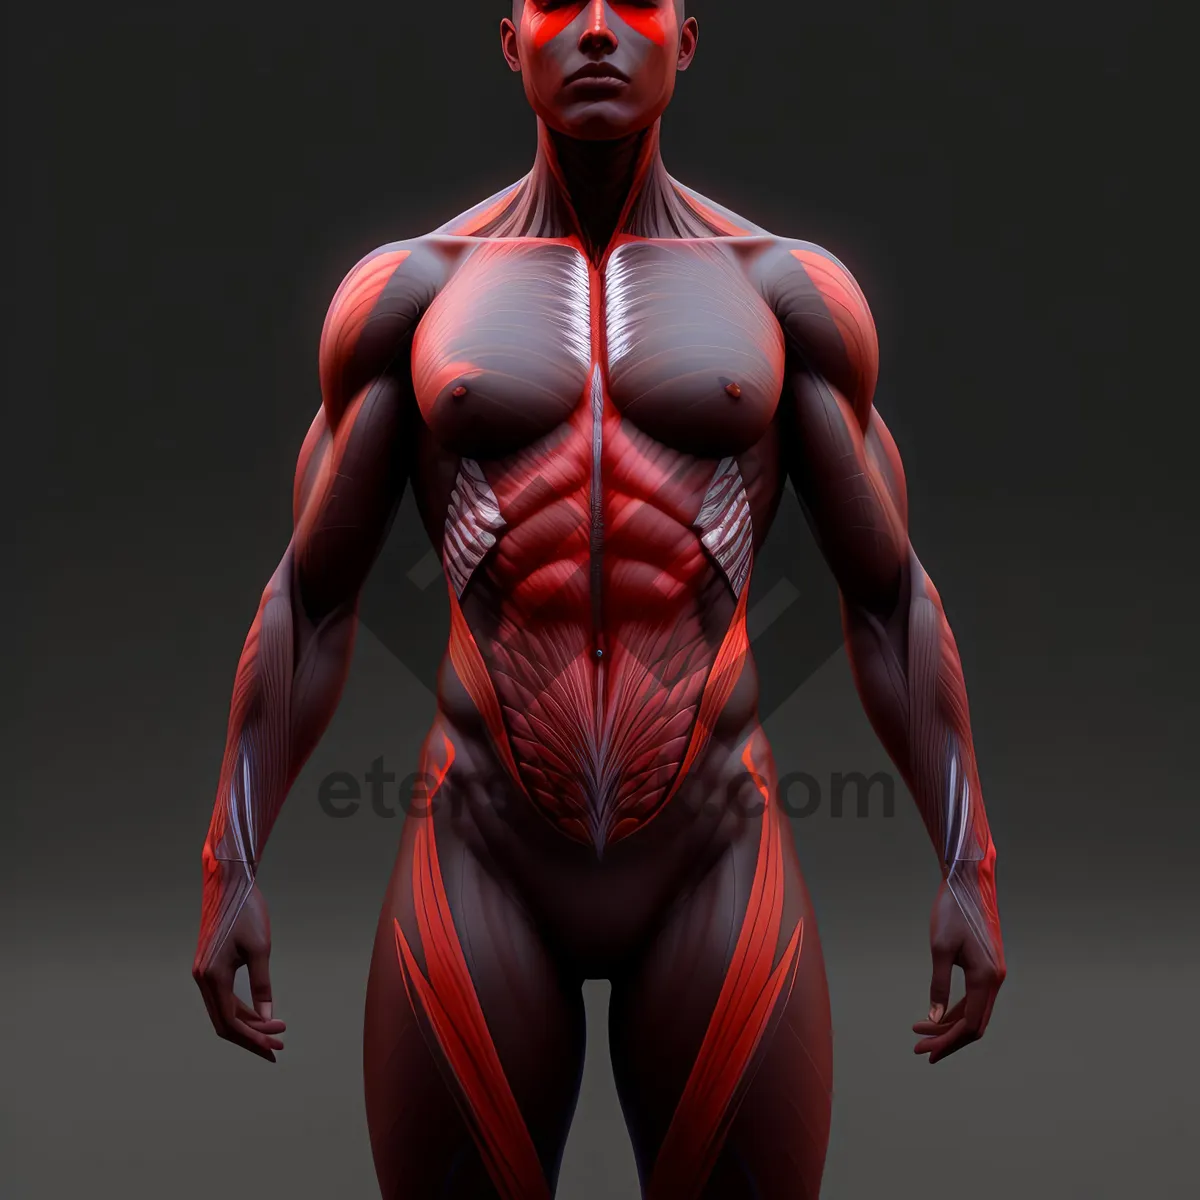 Picture of Male Human Anatomy 3D Model - Muscular Skeleton